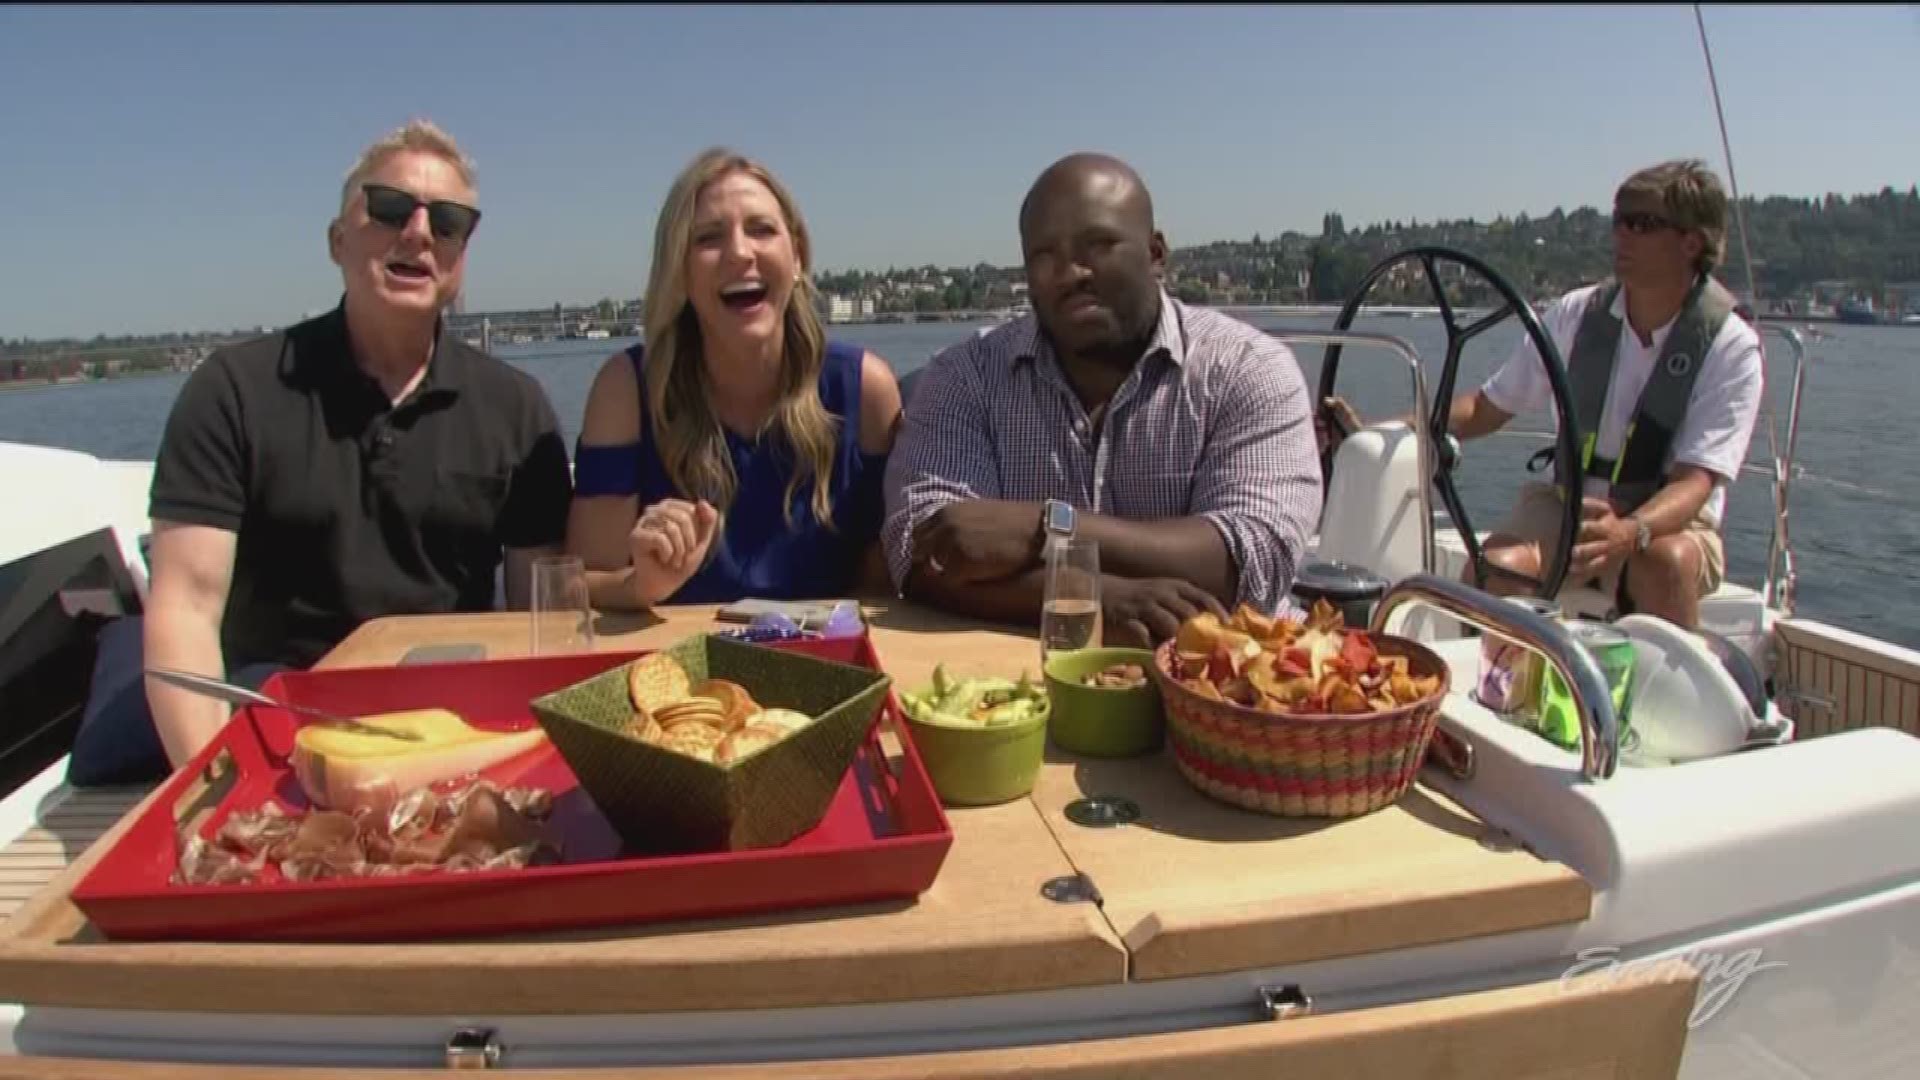 Kim Holcomb and Jim Dever host with special guest Terry Hollimon from the new Evening Boat in Seattle! FEATURING: New food at CenturyLink, Seafair Weekend, Roche Harbor Experience, Downtown Sailing Series, Auction of Washington Wines, and American Ninja Warrior's Akbar Gbaja-Biamila.